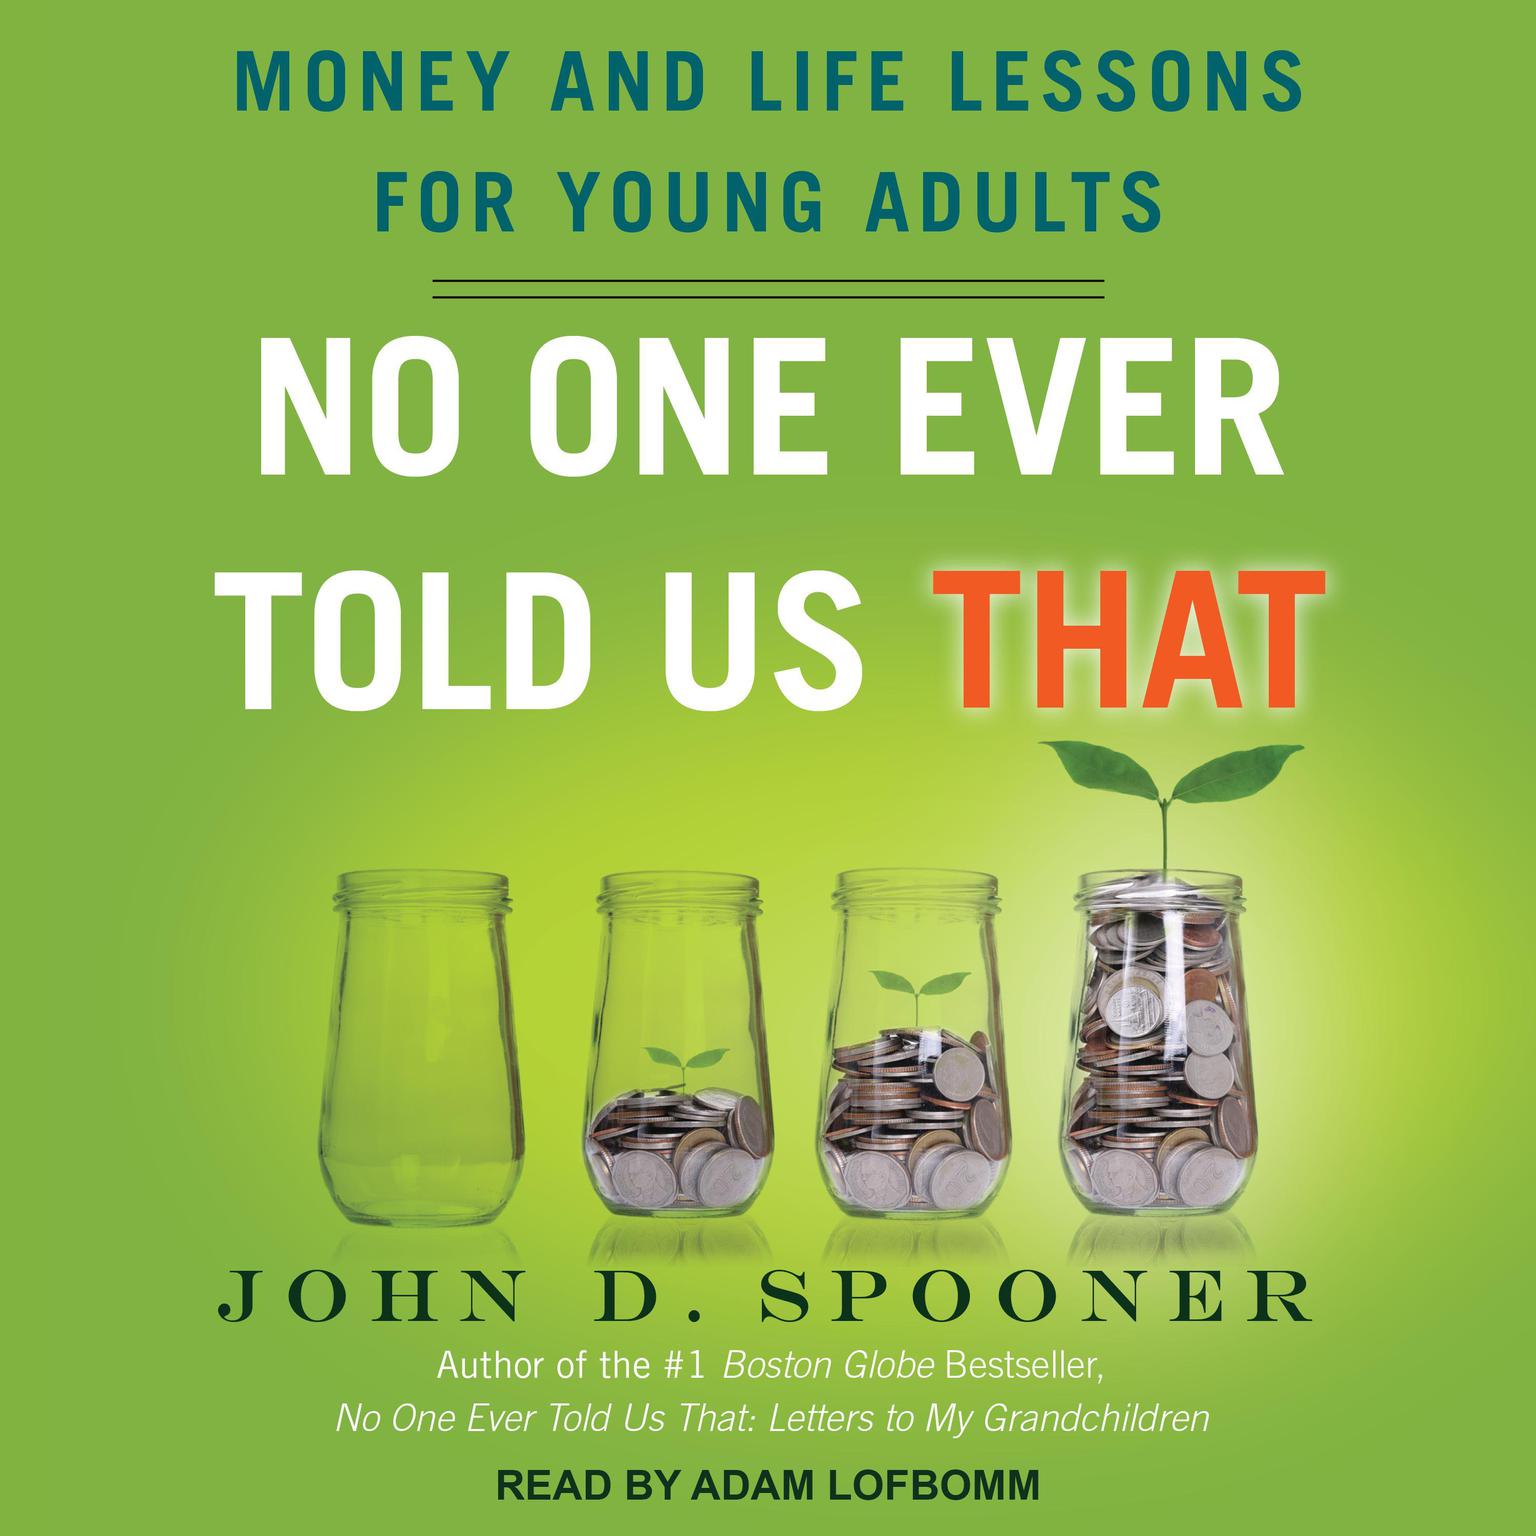 No One Ever Told Us That: Money and Life Lessons for Young Adults Audiobook, by John D. Spooner